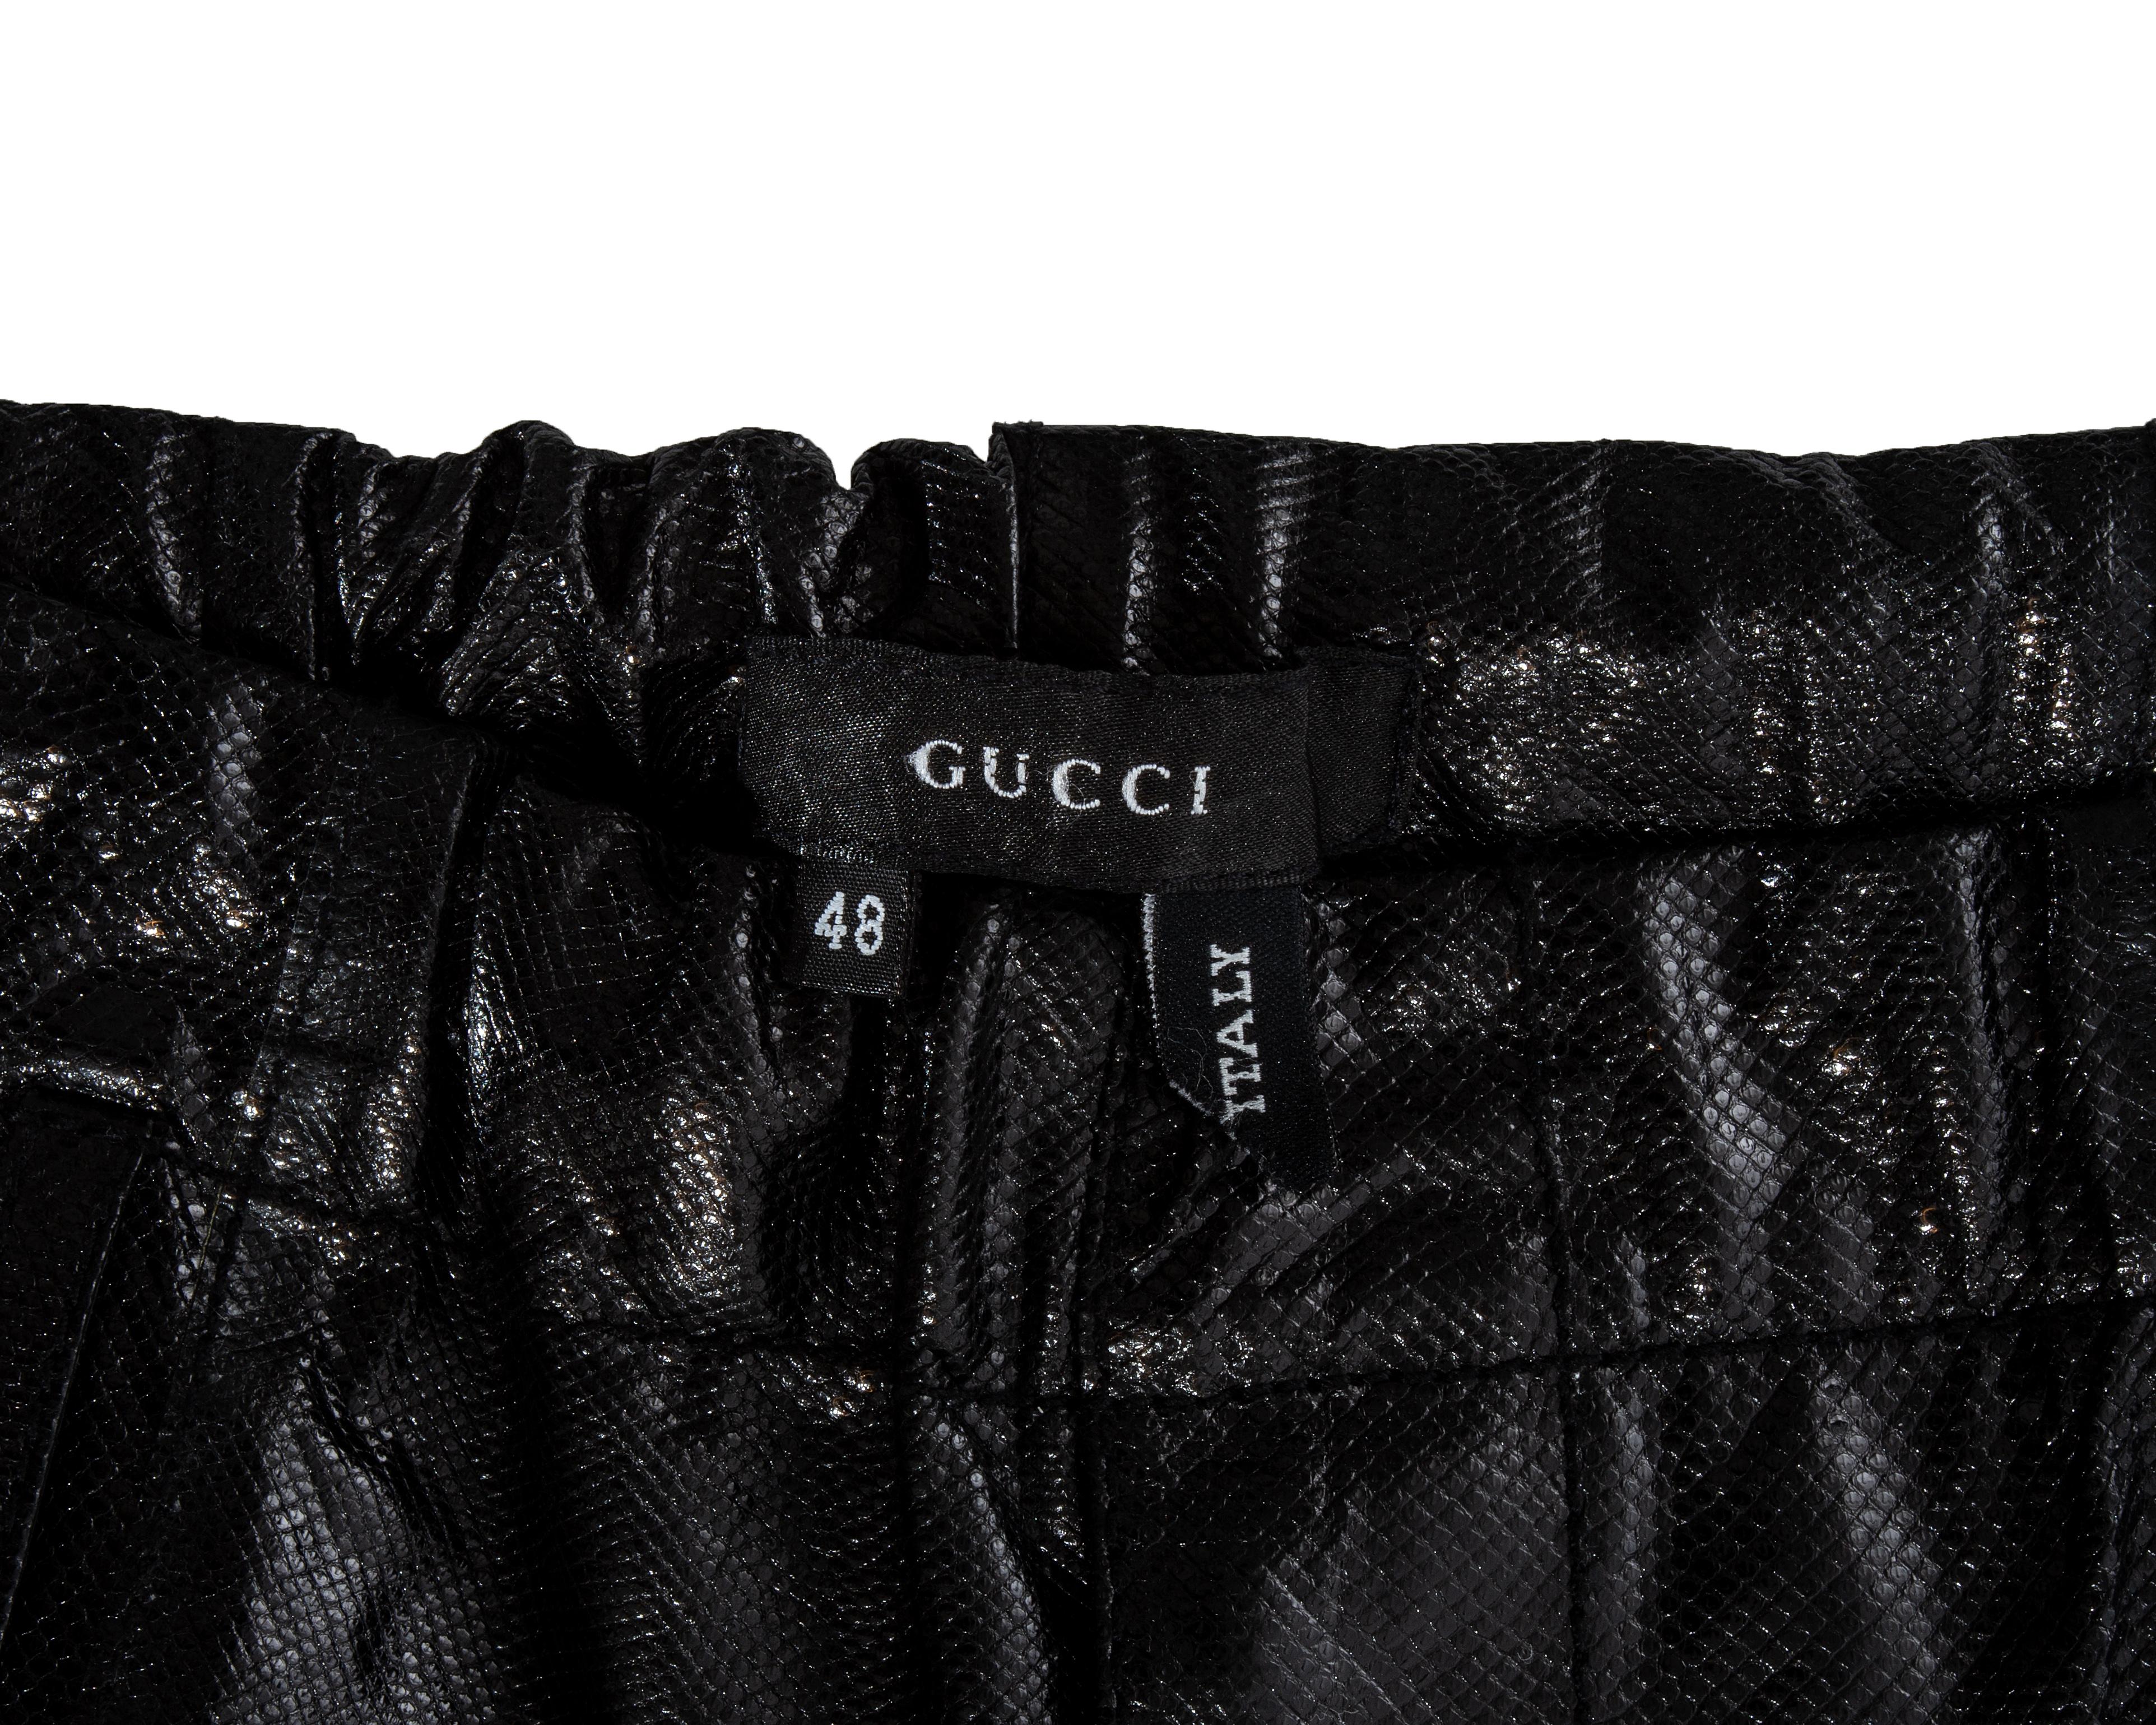 Gucci by Tom Ford unisex black lizard skin drawstring wide leg pants, ss 2001 For Sale 2